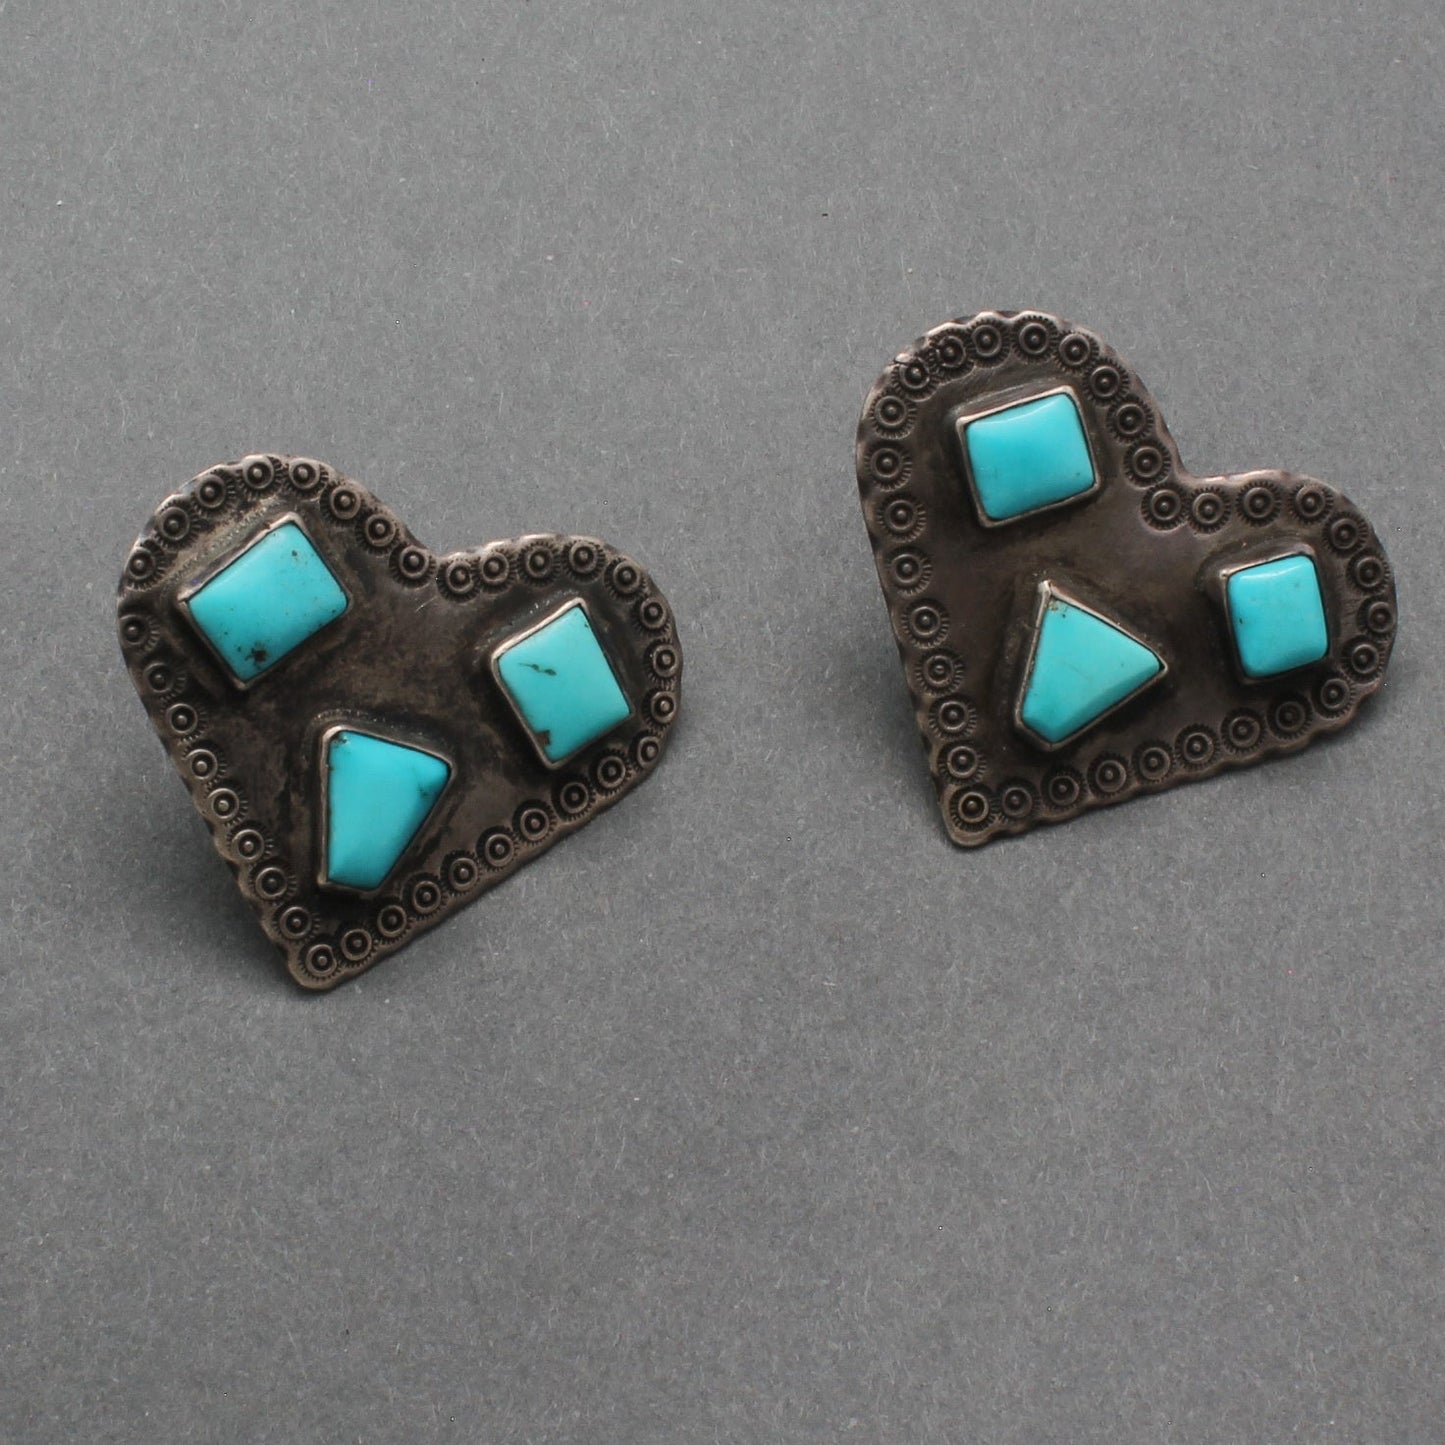 Old Navajo Large Heart Shaped Earrings of Silver and Turquoise - Turquoise & Tufa